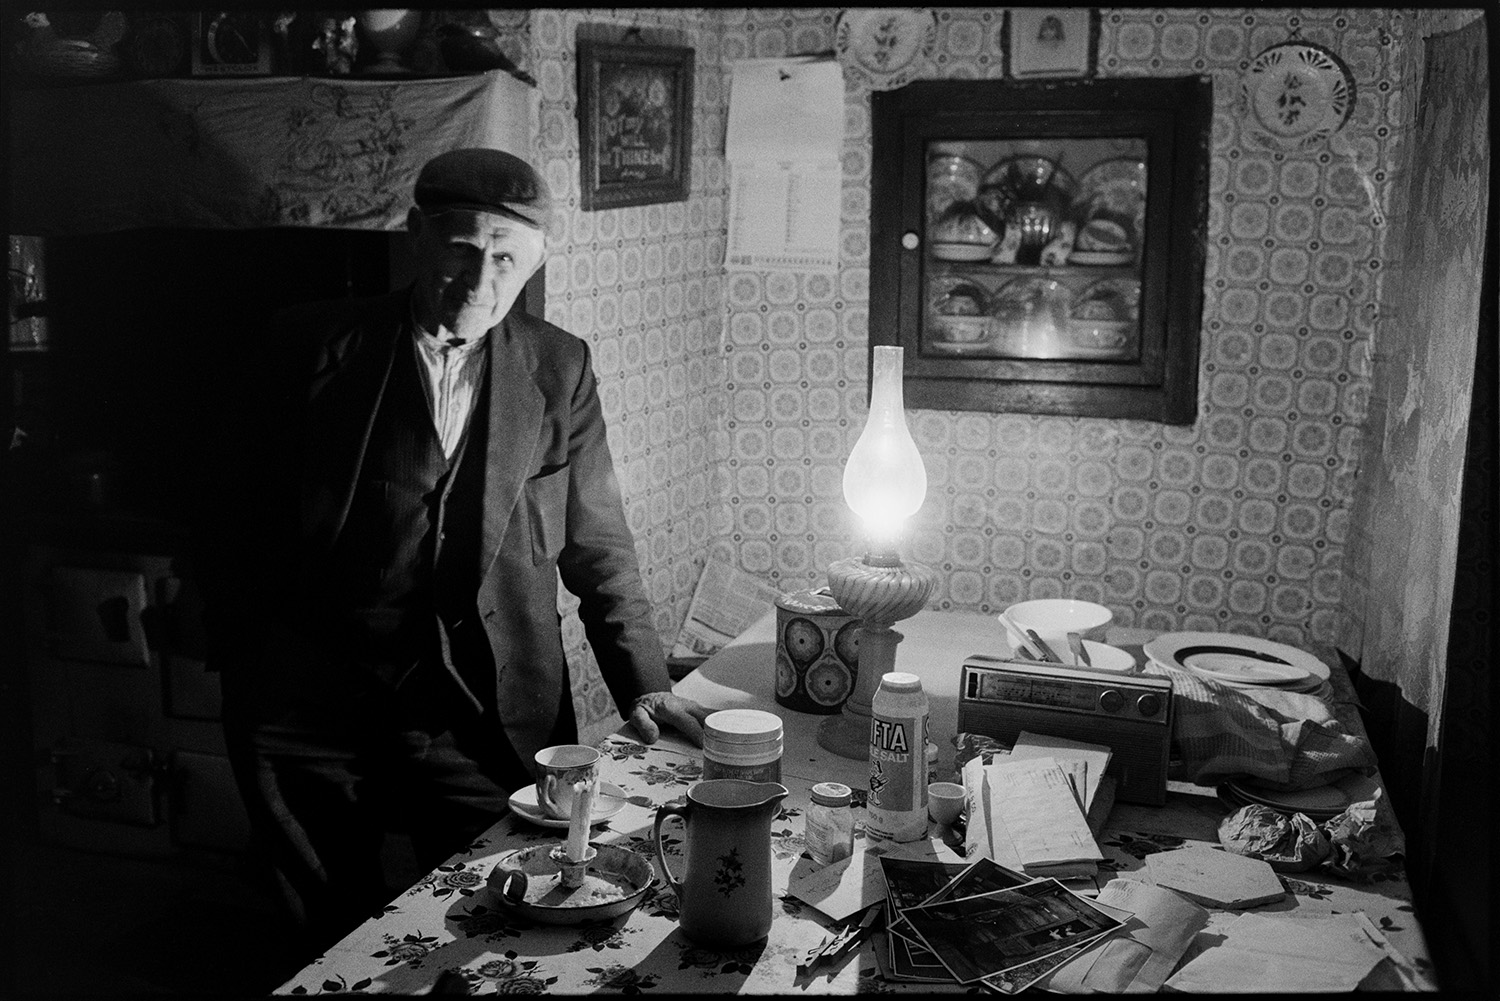 Farmhouse interior at night with oil lamp as light, farmer pouring tea, built in cupboard.
[Wilfie Spiers standing inside a room in his farmhouse at Mount Pleasant, Beamsworthy. he is stood by a table with a lit oil lamp, unlit candle in a holder, tea cup and saucer, jug, plates, radio, photographs and papers. A cupboard is built into the wall behind him containing china. A picture, a calendar and three china plates are hung on the wall which is covered with patterned wallpaper.]